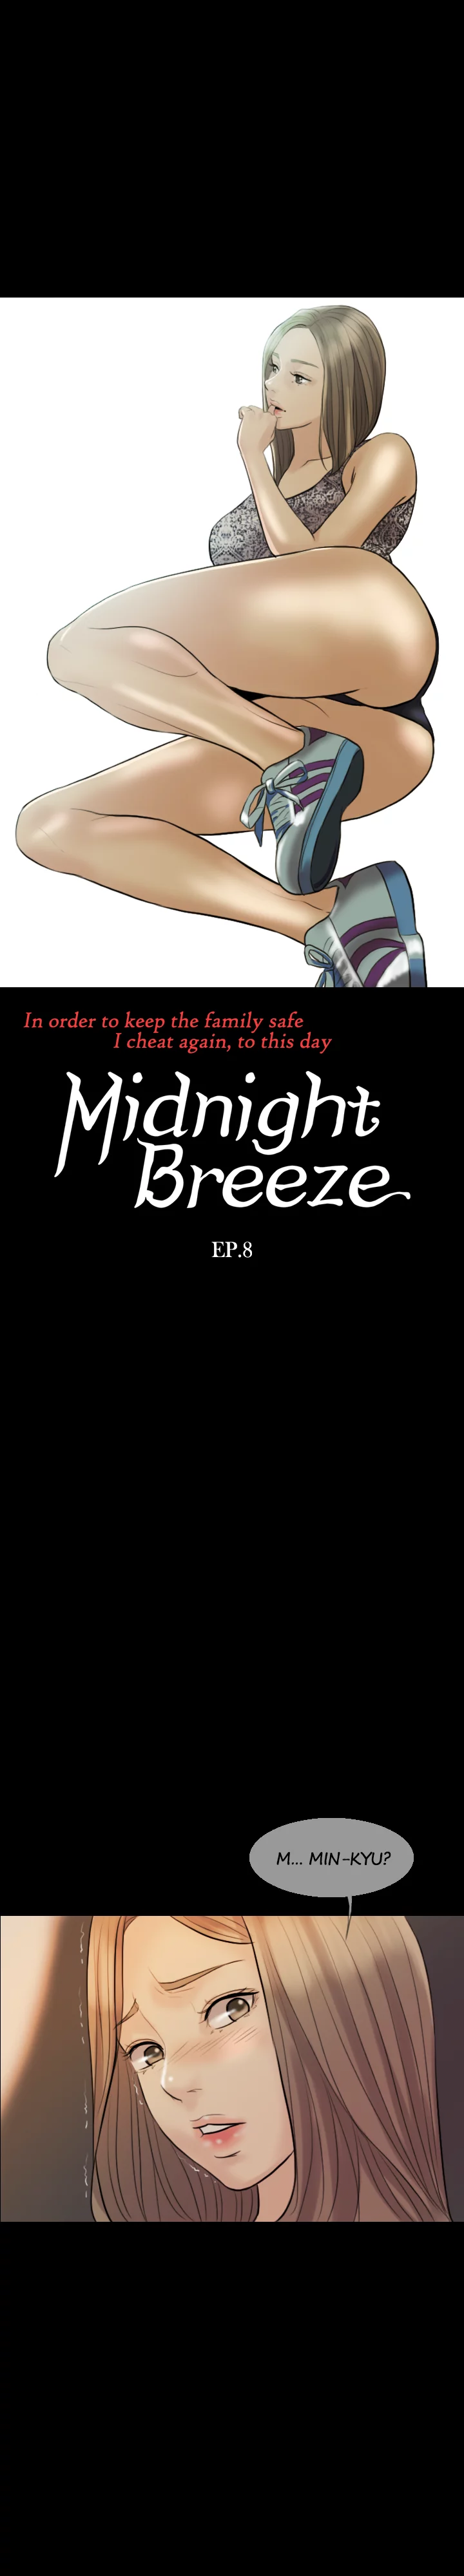 Midnight Breeze - Chapter 8 Page 2